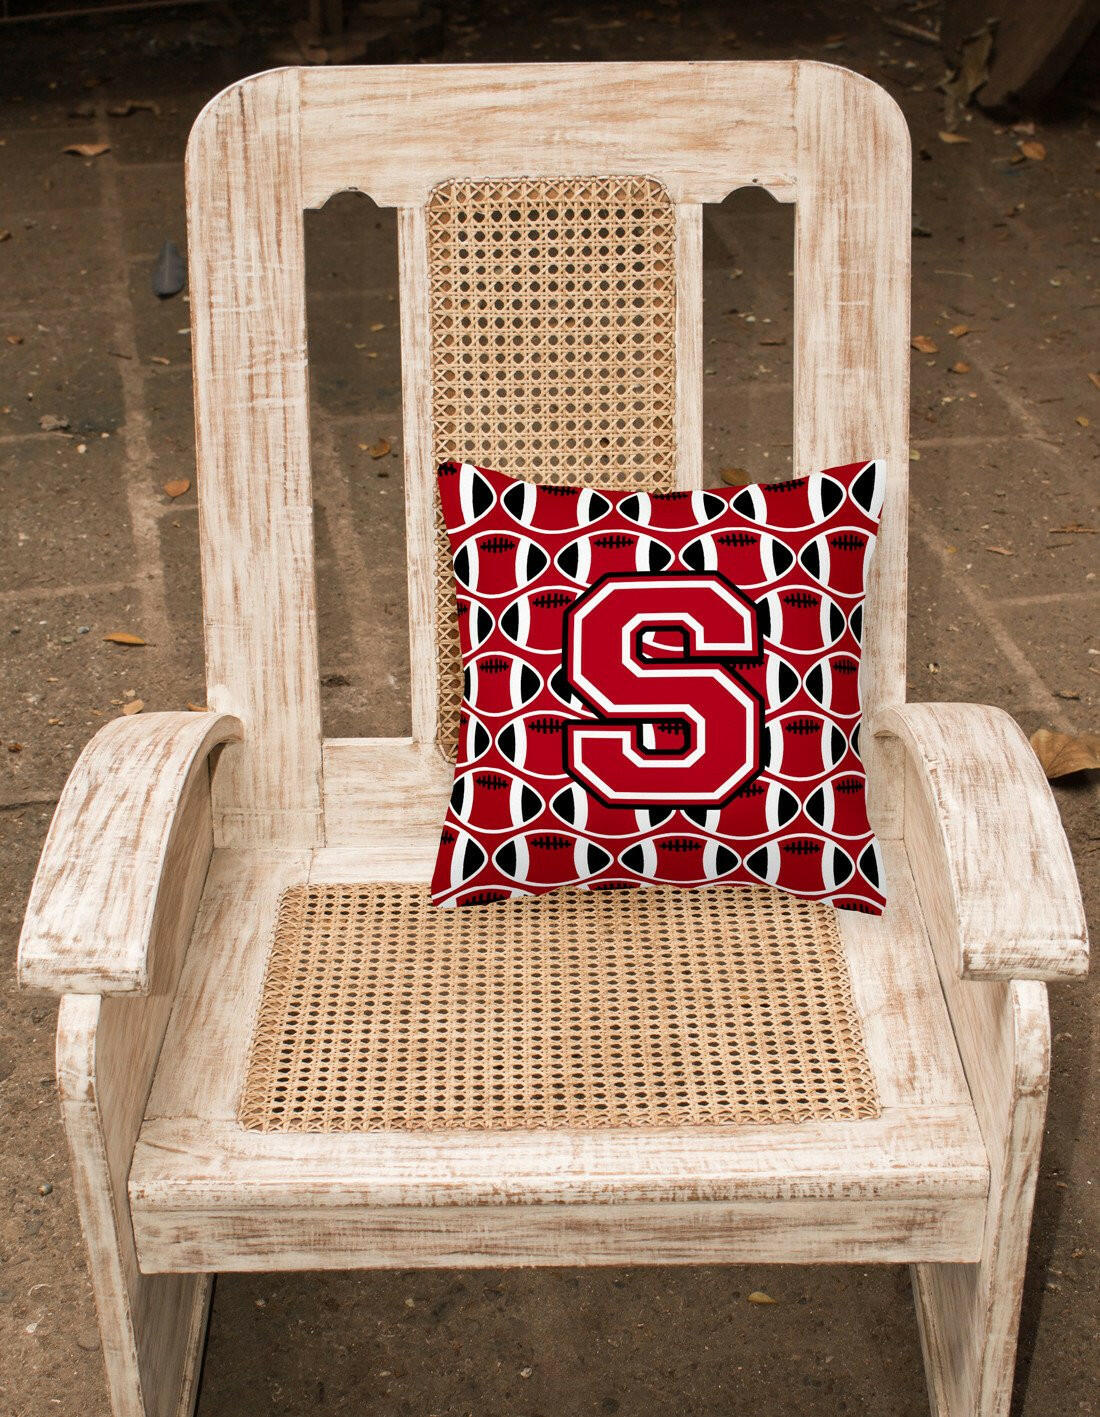 Letter S Football Red, Black and White Fabric Decorative Pillow CJ1073-SPW1414 by Caroline's Treasures